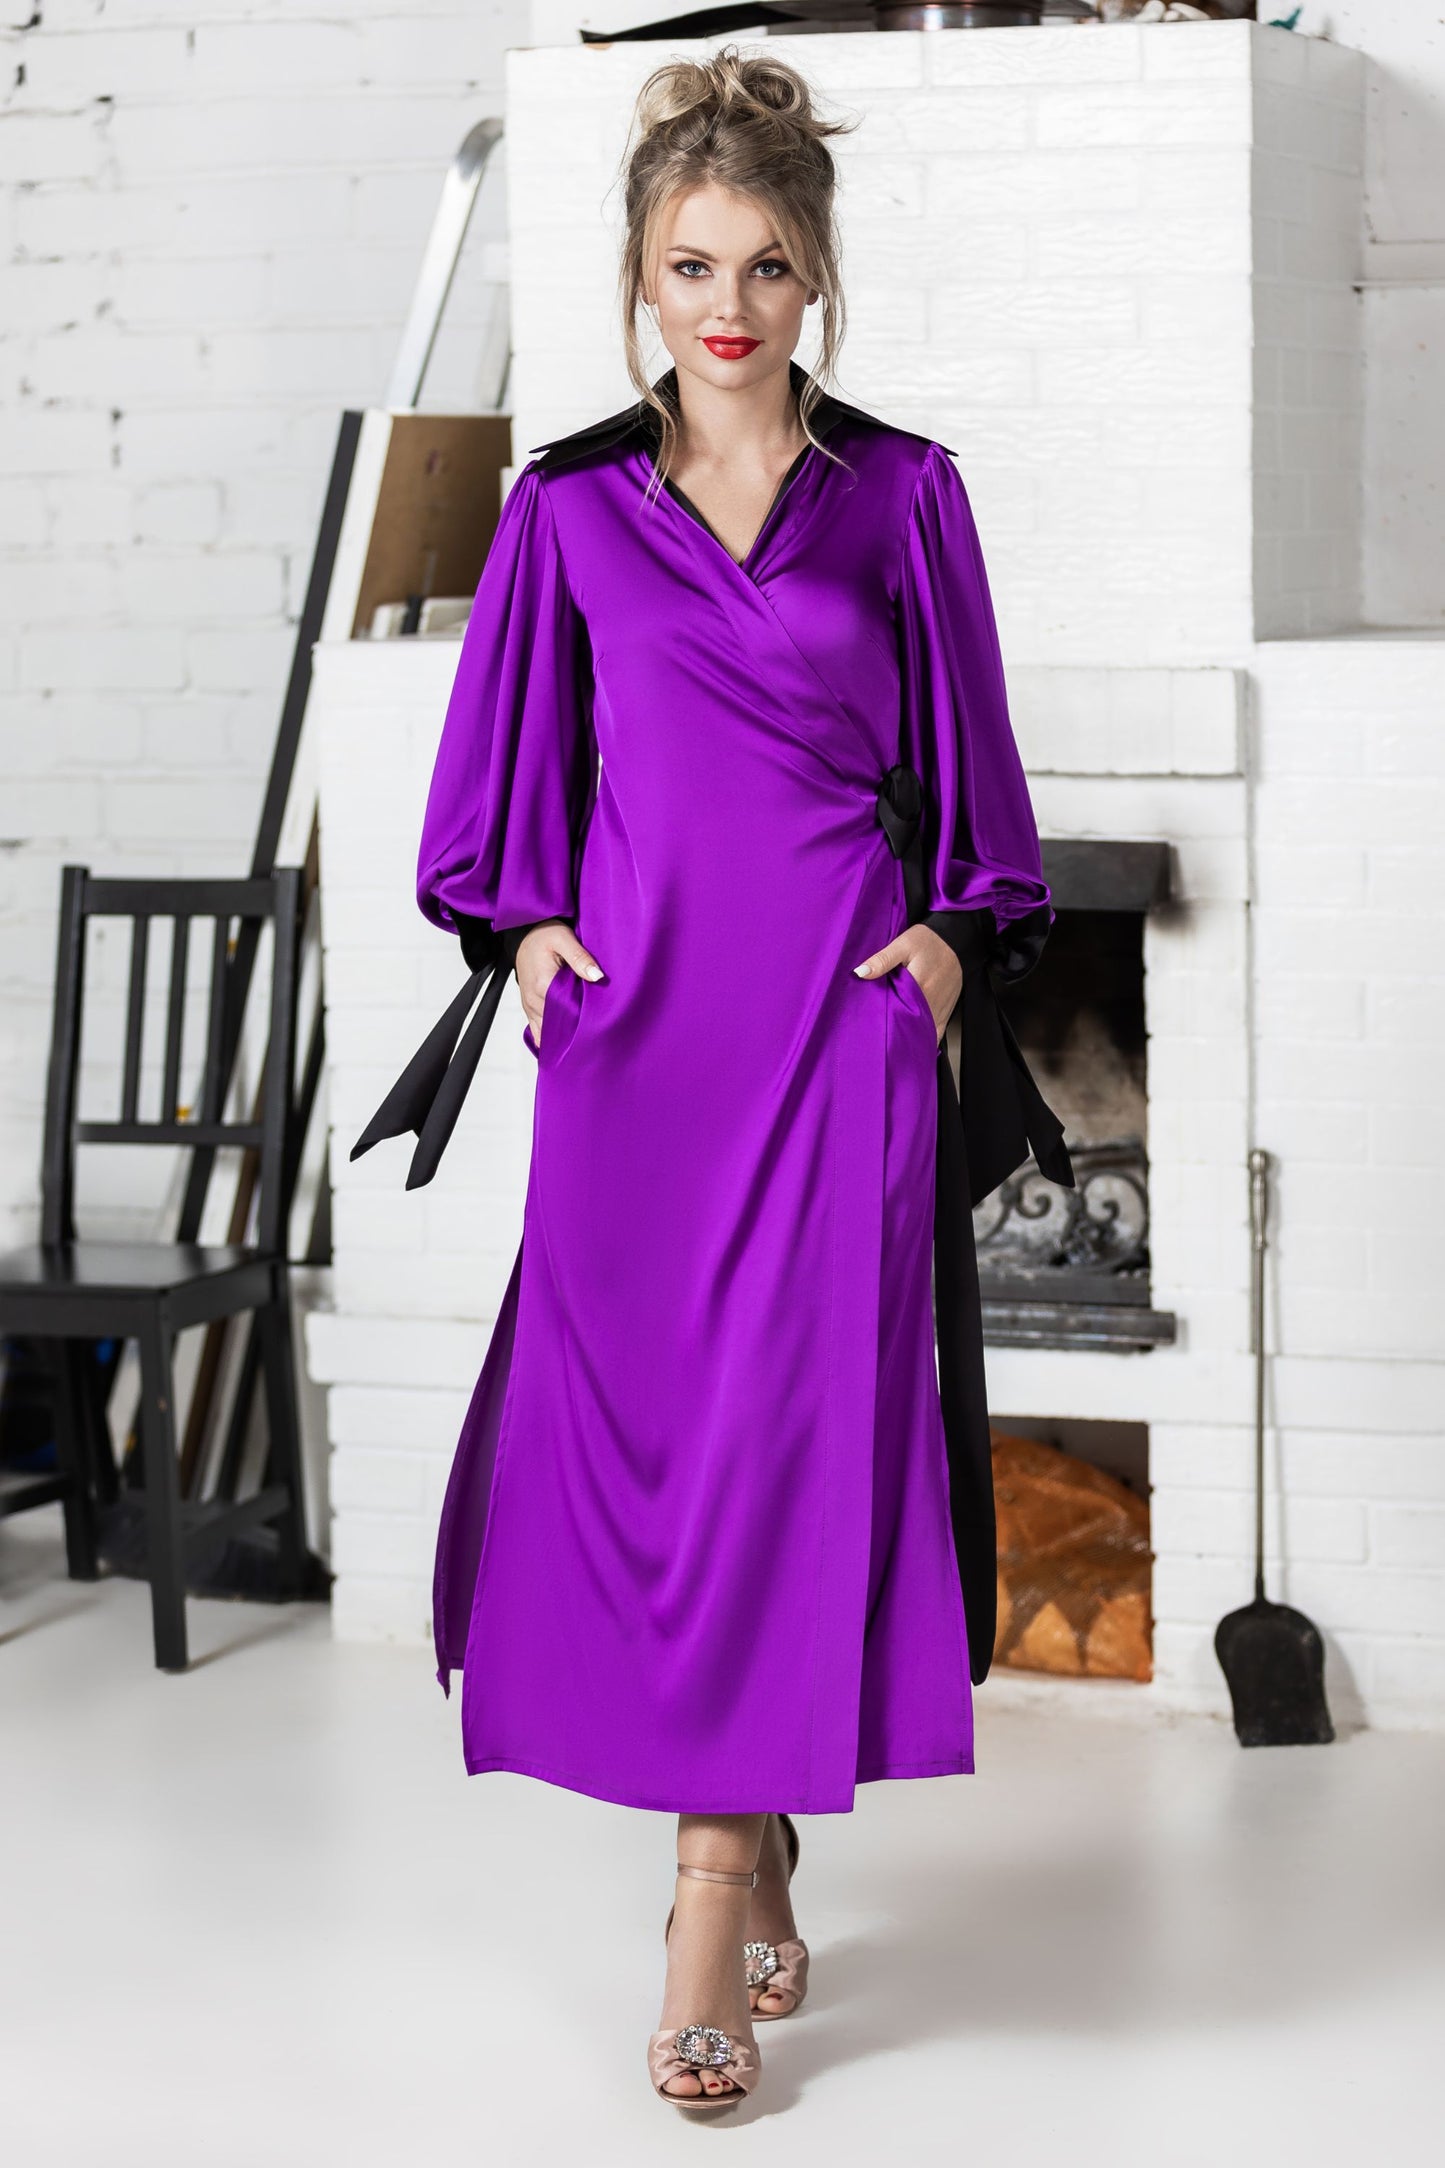 Kimono satin dress with pockets and contrasting color details